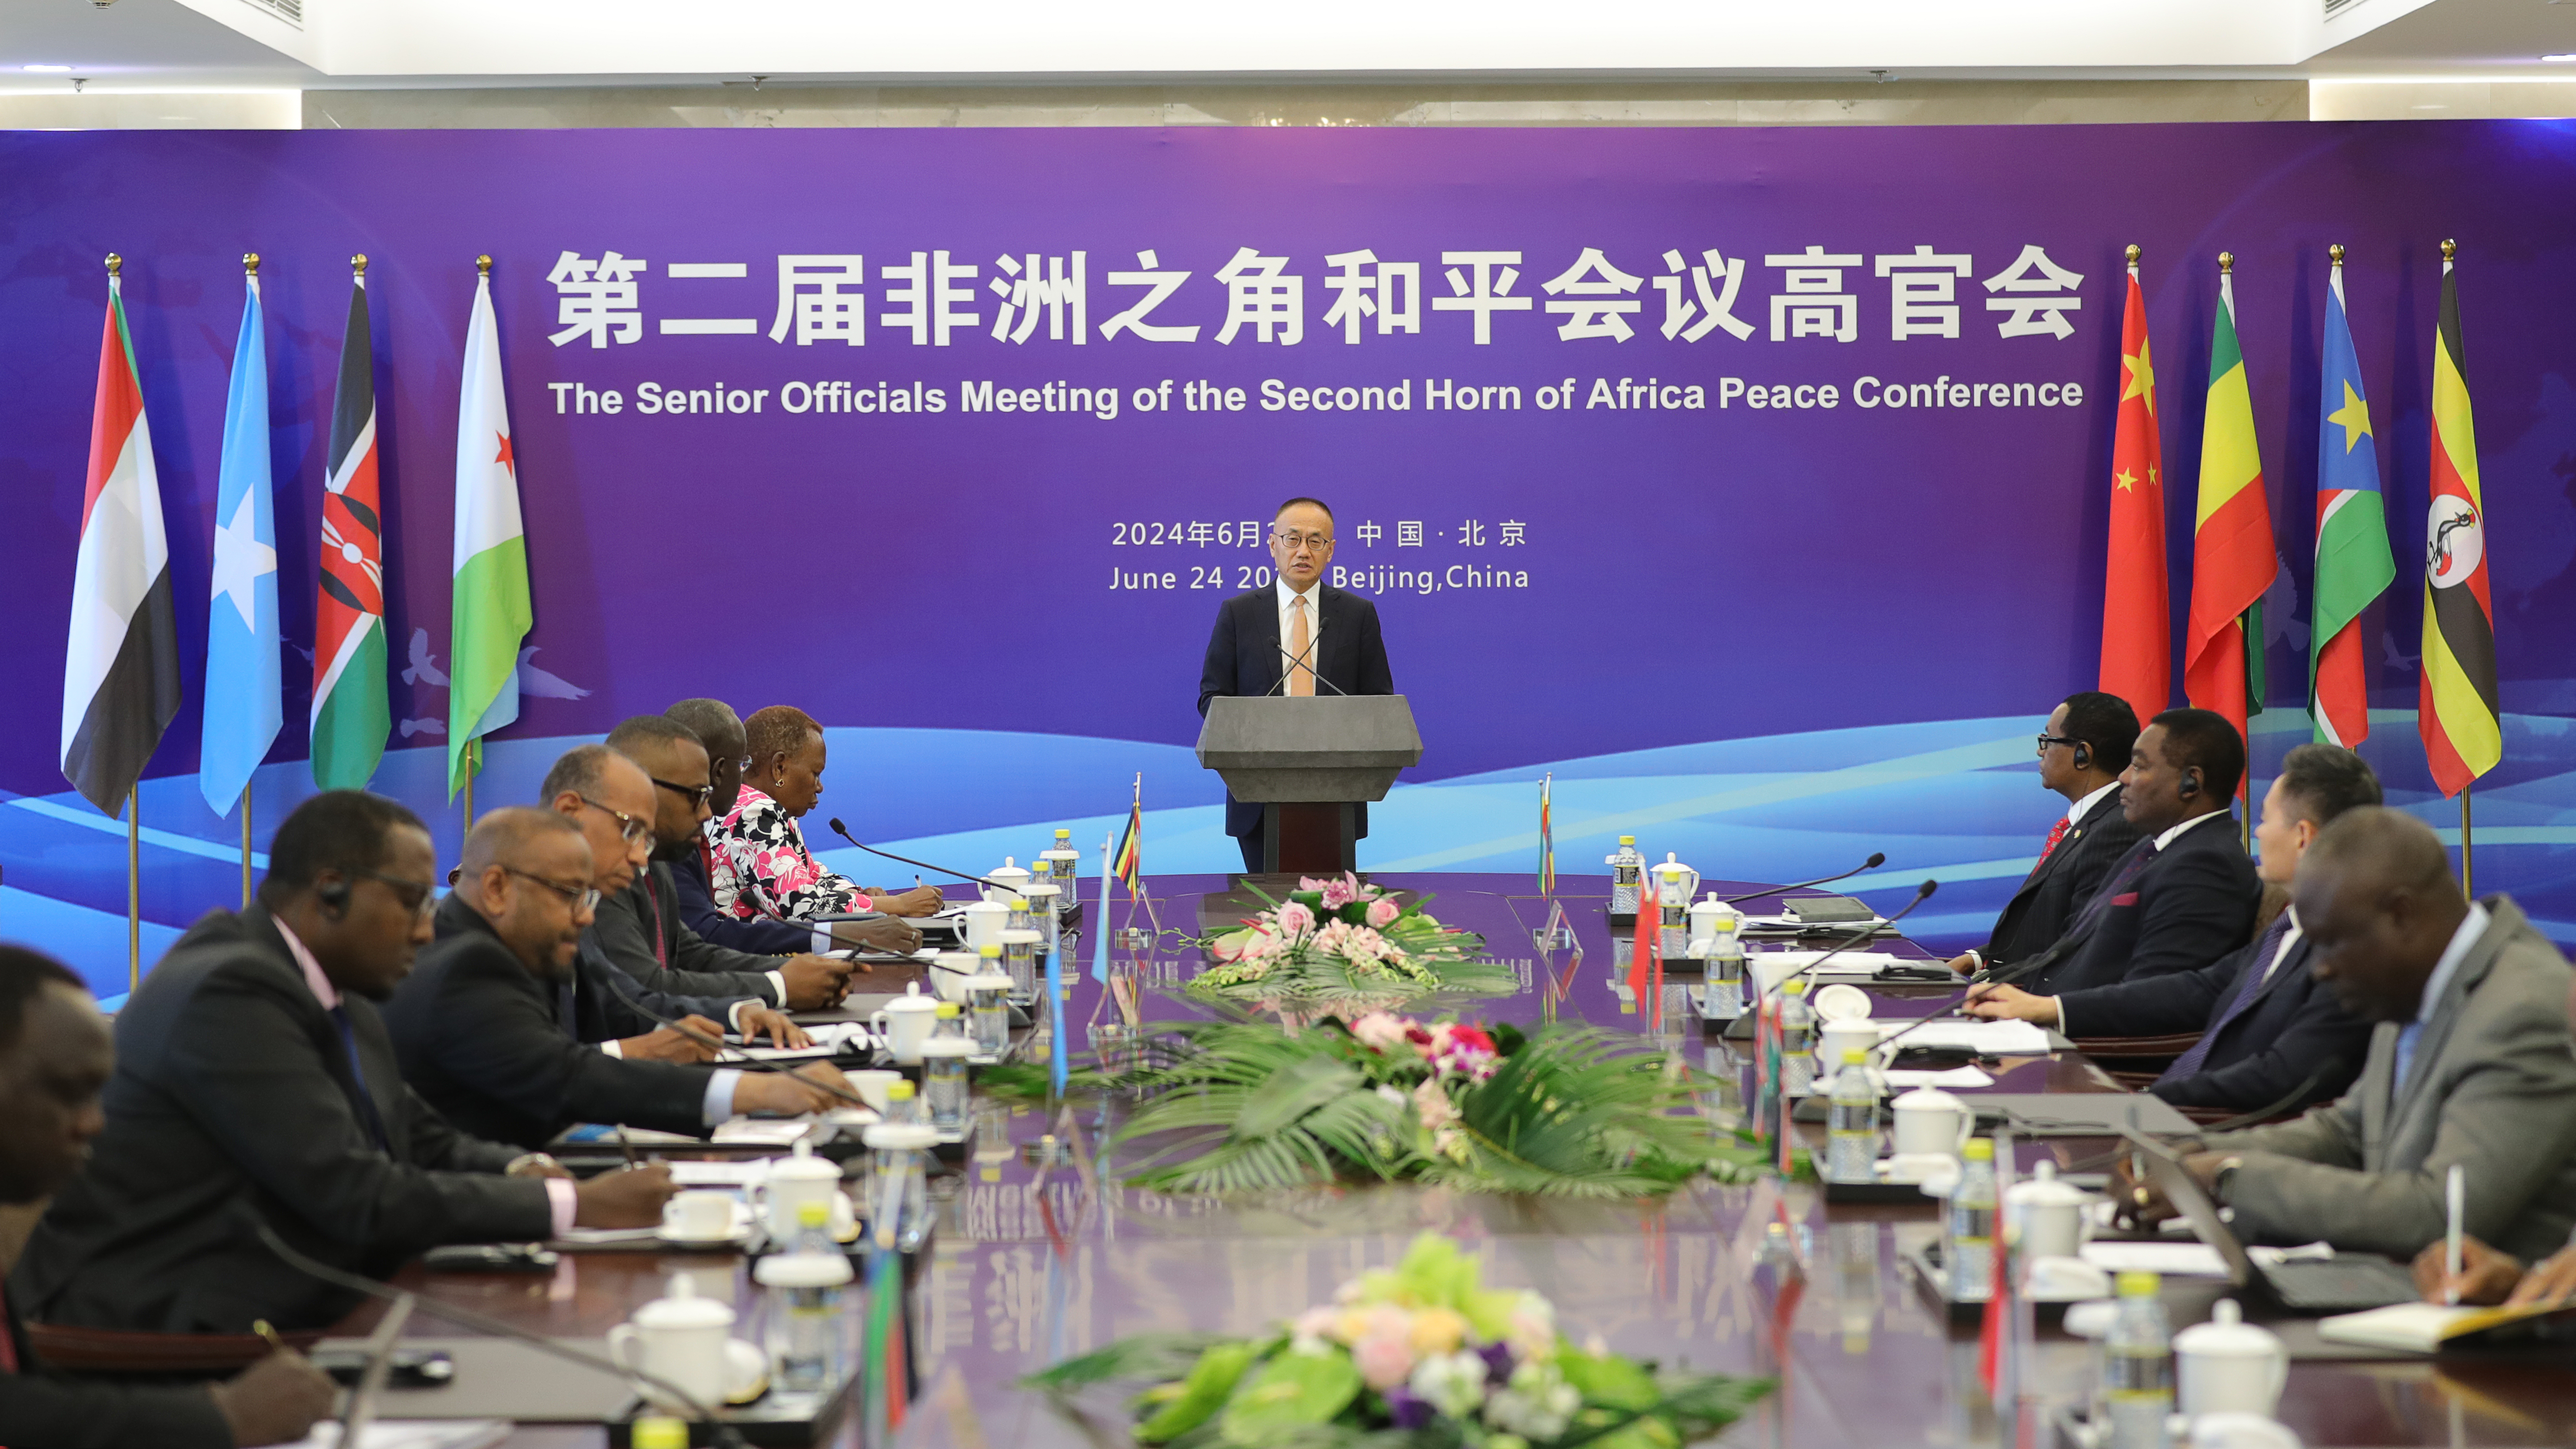 Chinese Vice Foreign Minister Chen Xiaodong addresses the Senior Officials Meeting of the Second Horn of Africa Peace Conference, Beijing, China, June 24, 2024. /China's Ministry of Foreign Affairs